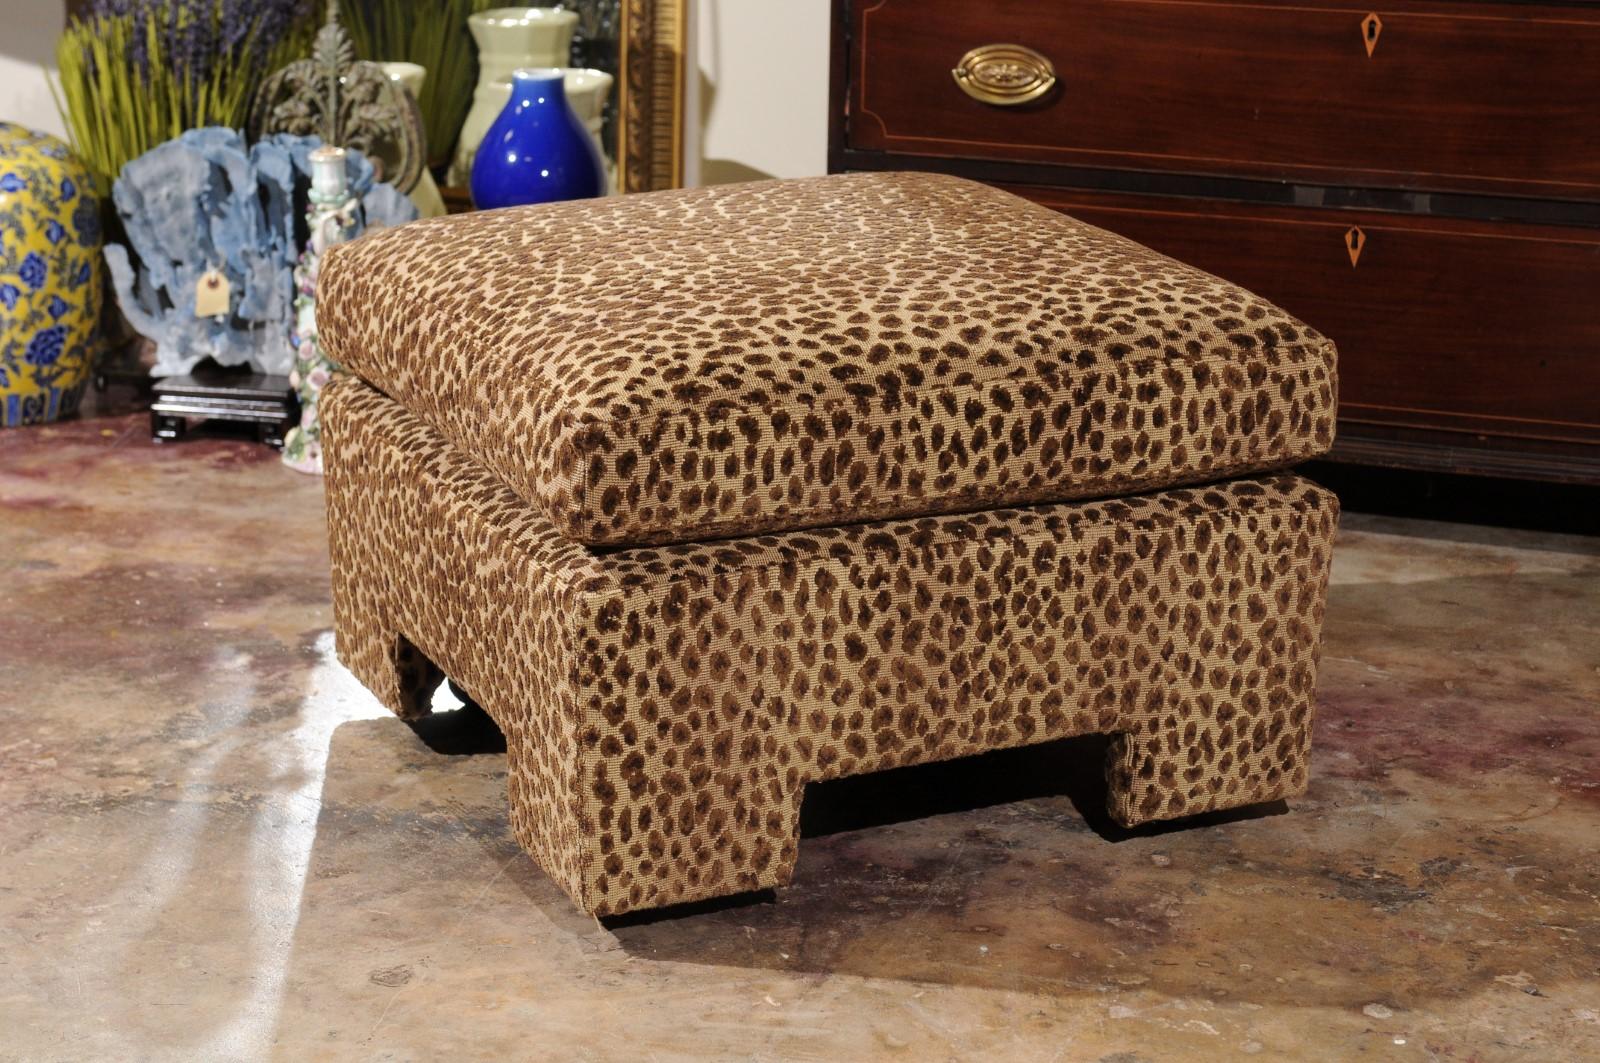 A lovely custom made ottoman on casters.
Upholstered in a Lee Jofa animal print.